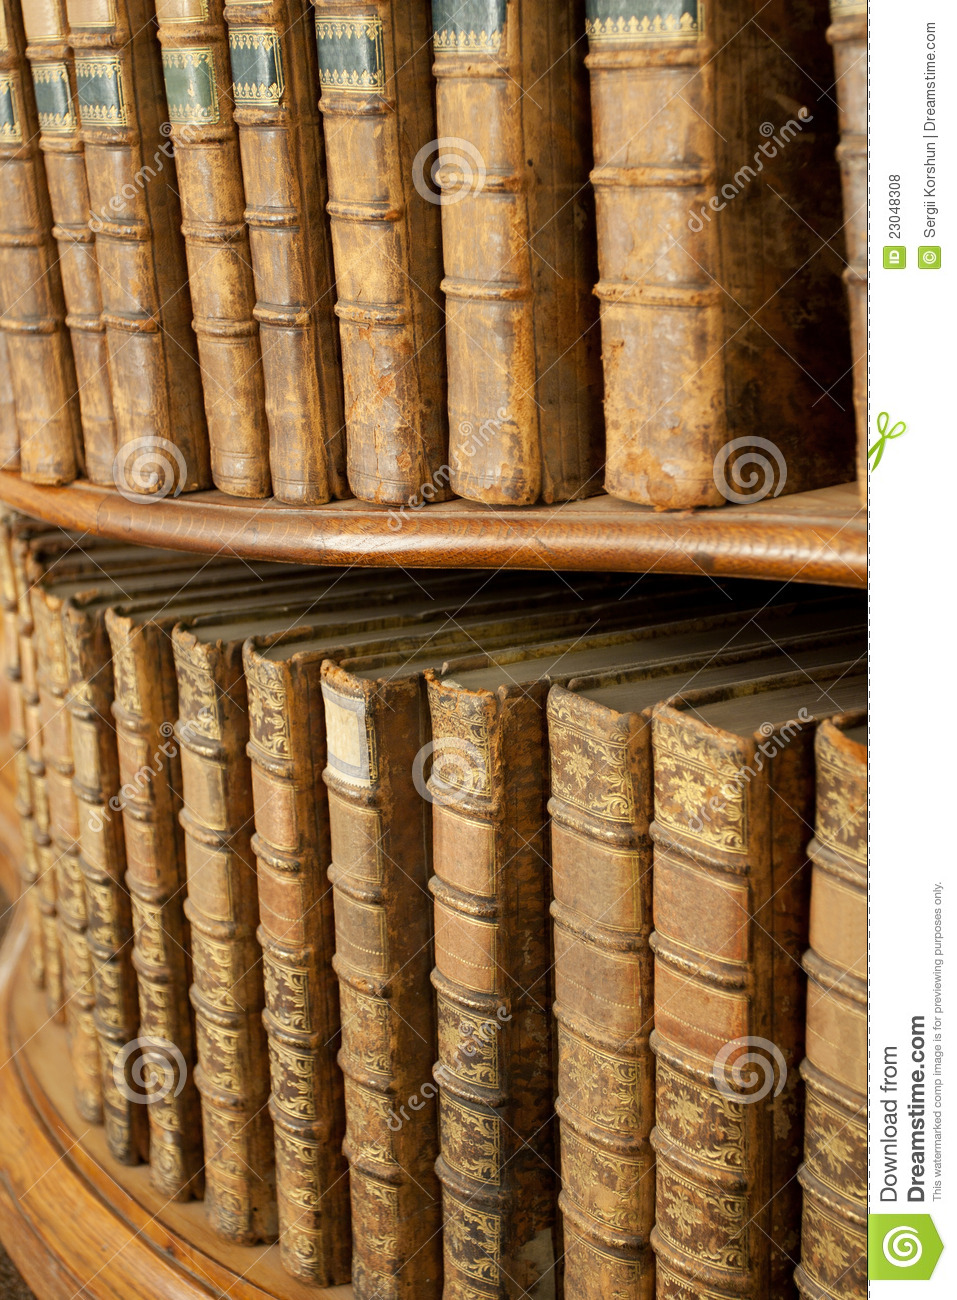 Covers Of Old Medieval Books On Shelf In Bookcase Royalty Free Stock